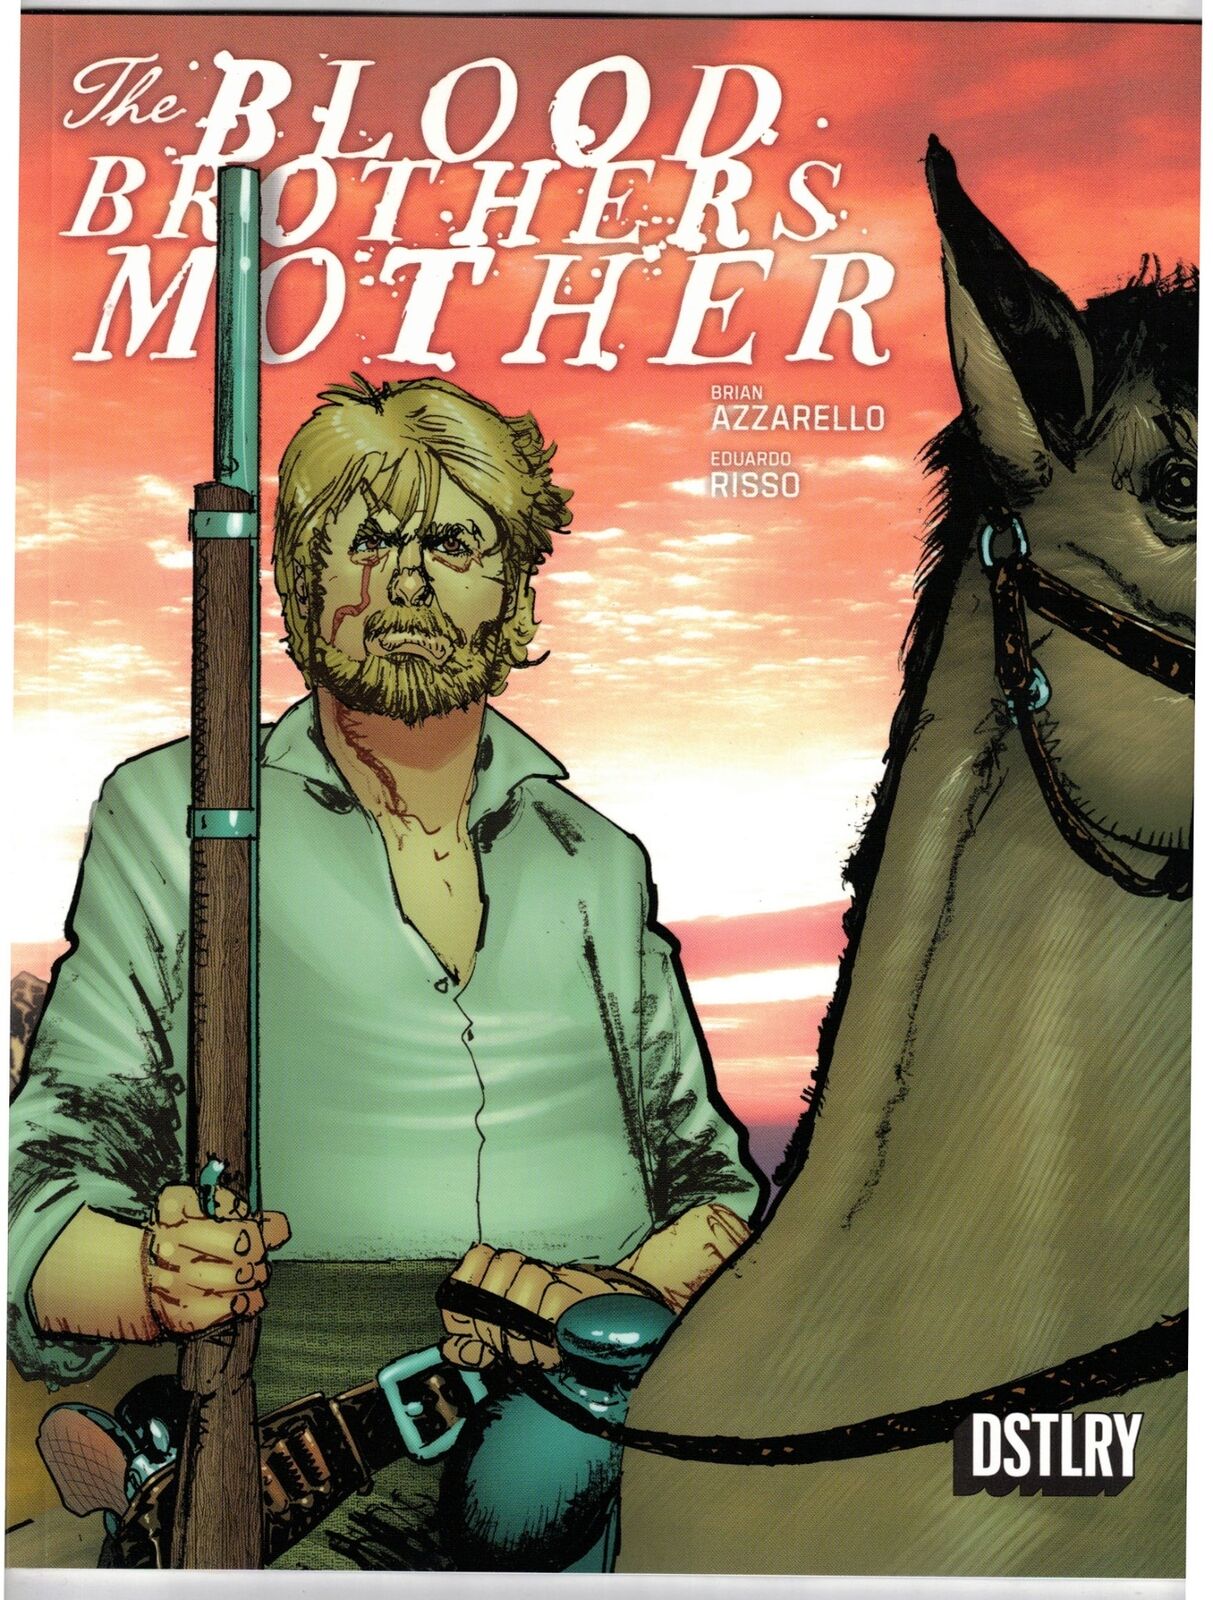 THE BLOOD BROTHERS MOTHER #1-1:25 HOWARD CHAYKIN VARIANT-BRIAN AZZARELLO- DSTLRY